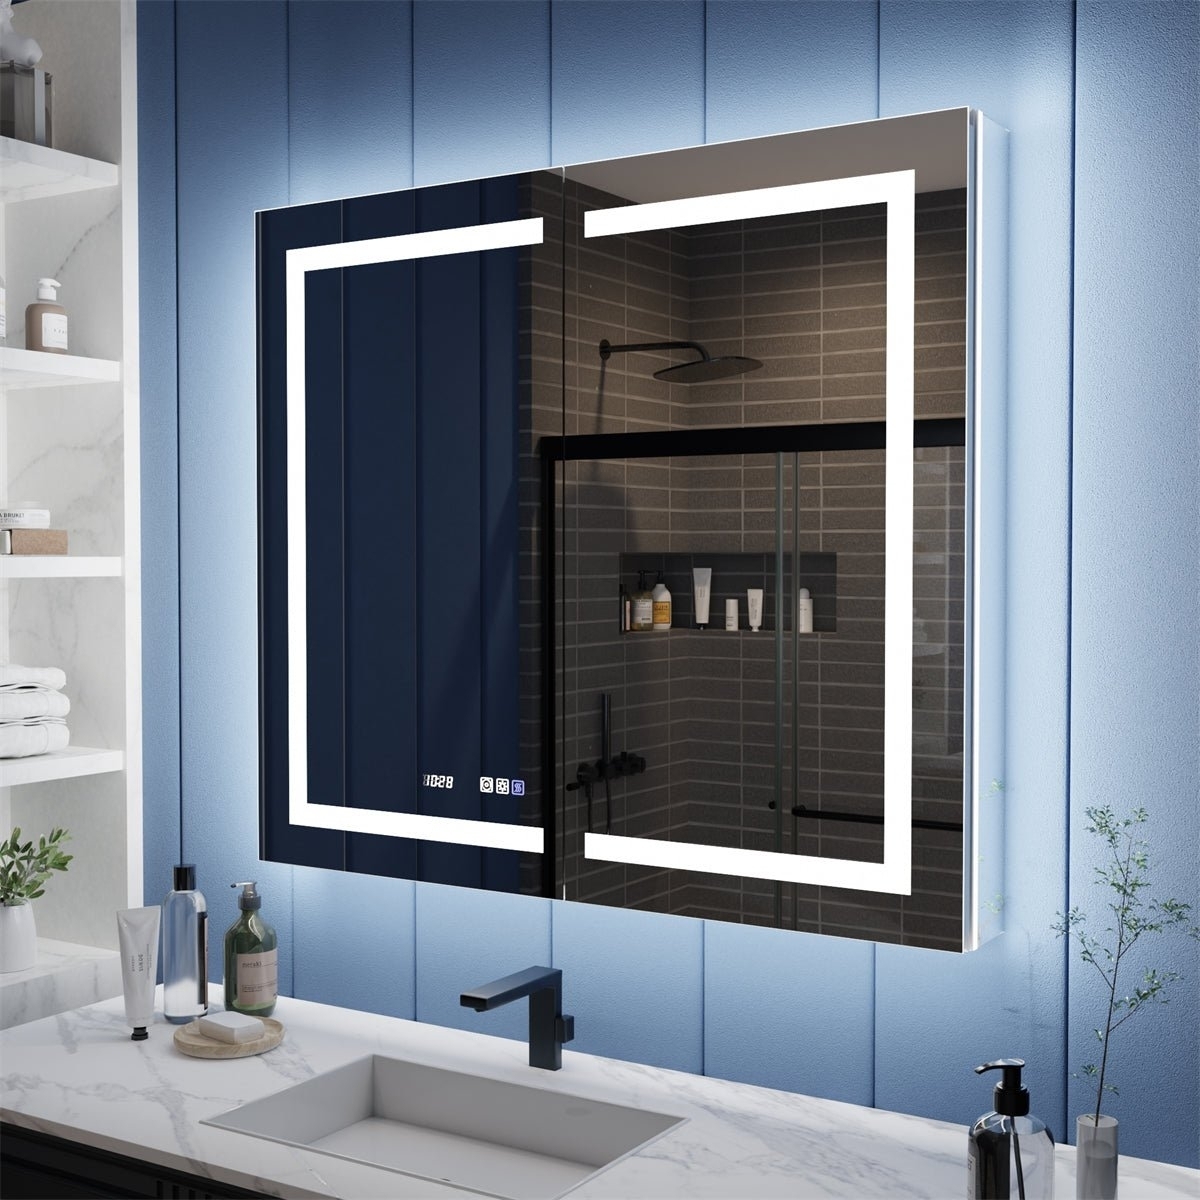 allsumhome Illusion-B 42" x 36" LED Lighted Inset Mirrored Medicine Cabinet with Magnifiers Front and Back Light